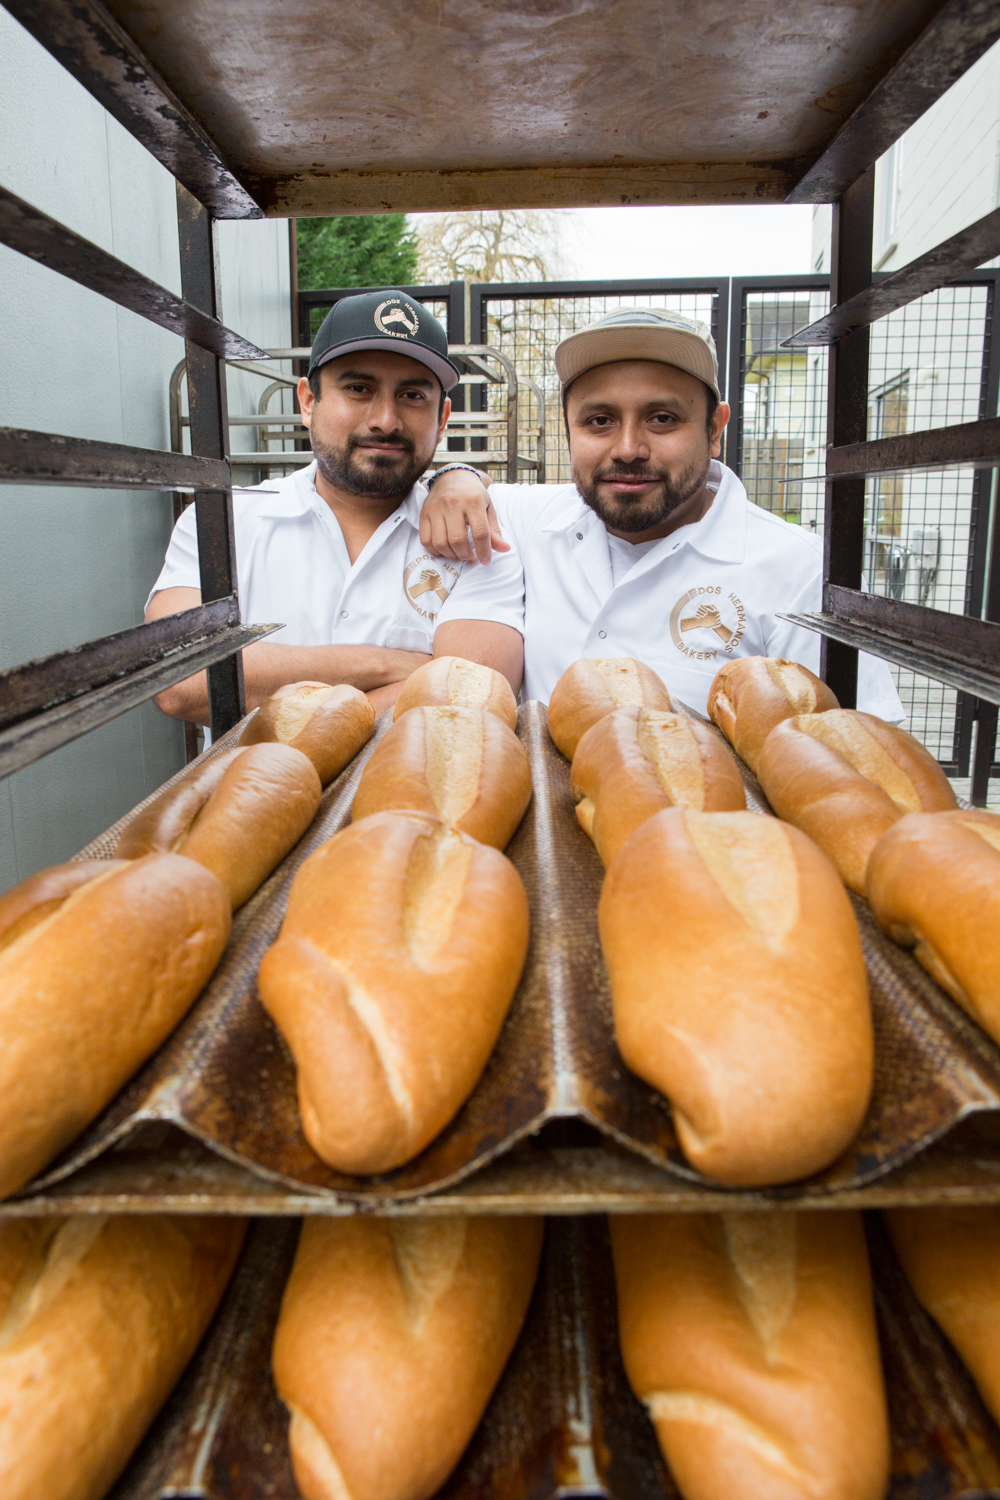 Two men pose on the other side of a rack of fresh bread.